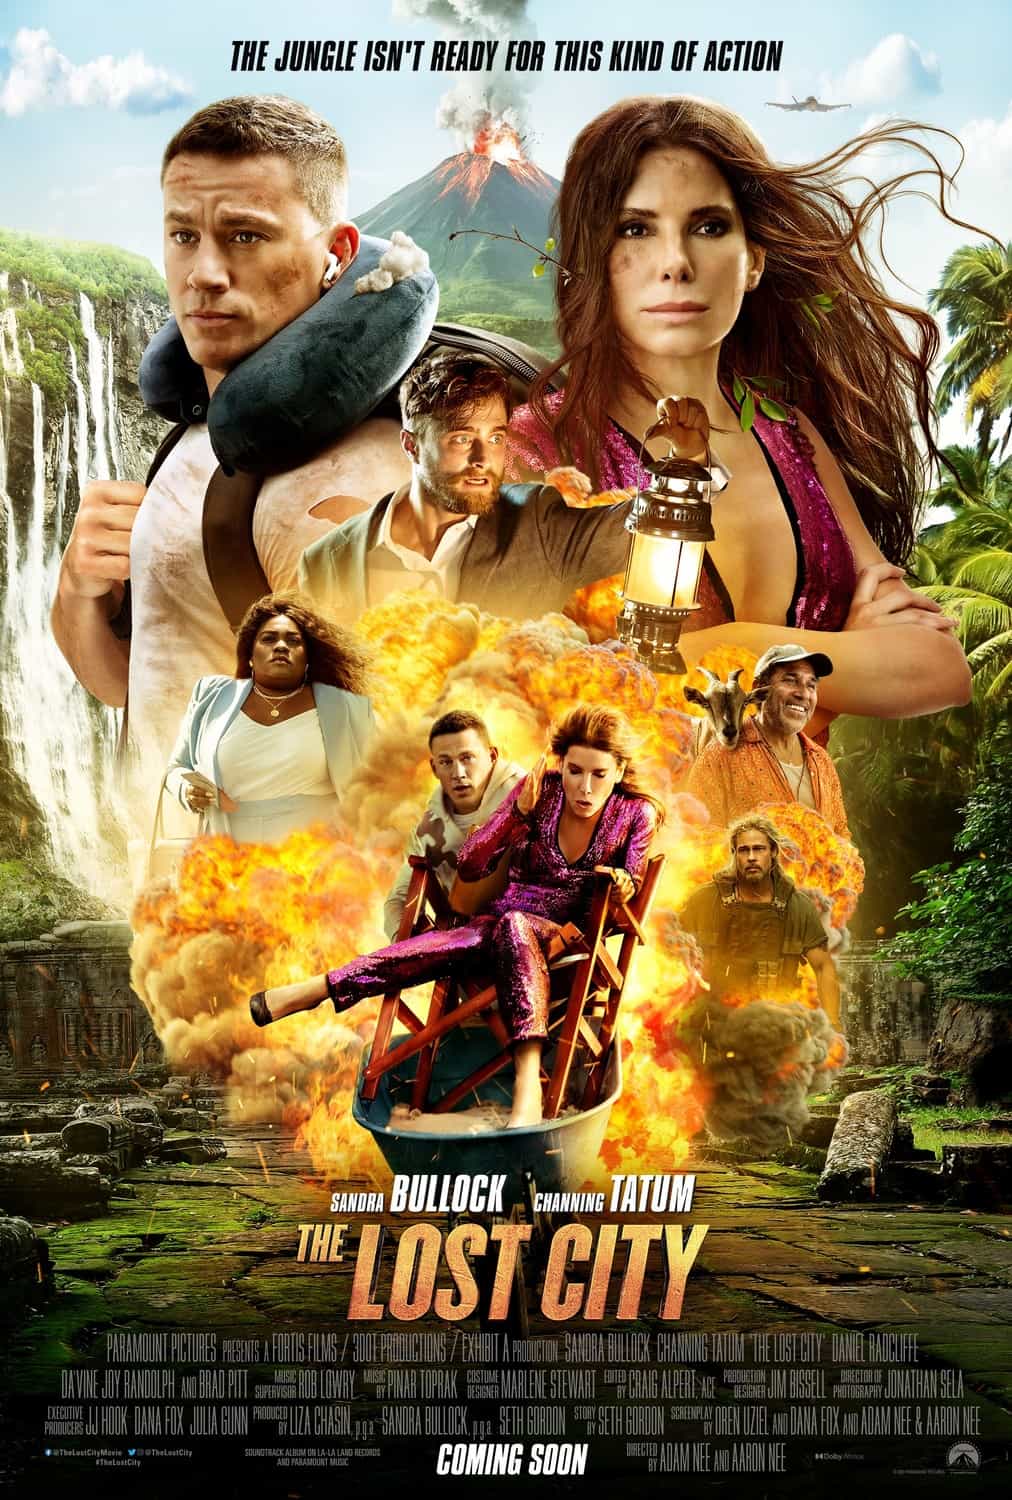 The Lost City is given a 12A age rating in the UK for moderate violence, brief bloody images, sex references, language